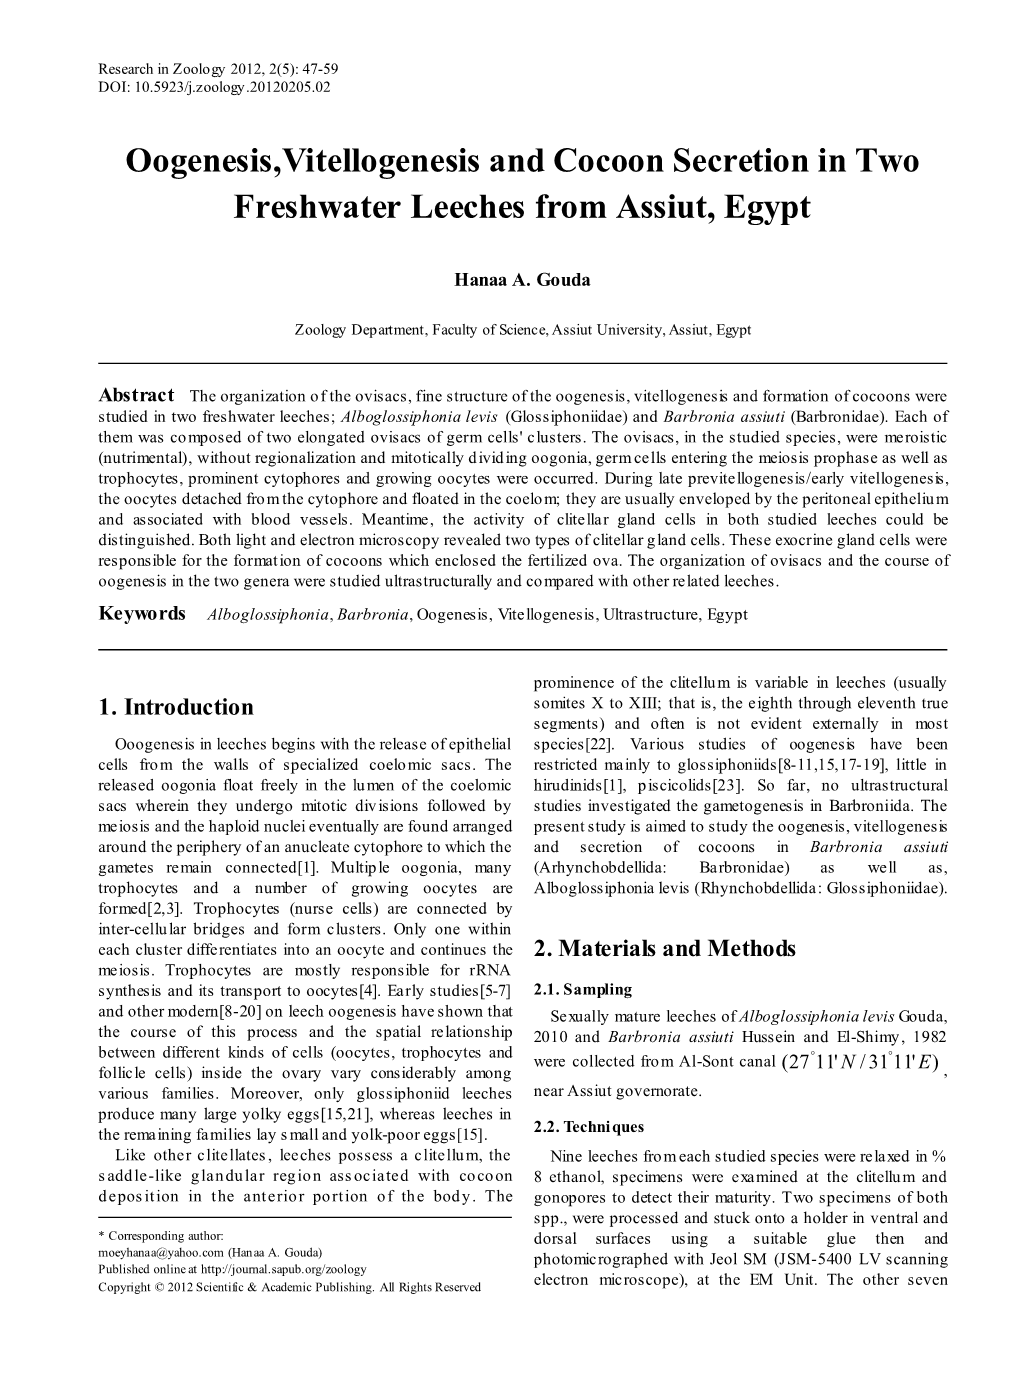 Oogenesis,Vitellogenesis and Cocoon Secretion in Two Freshwater Leeches from Assiut, Egypt